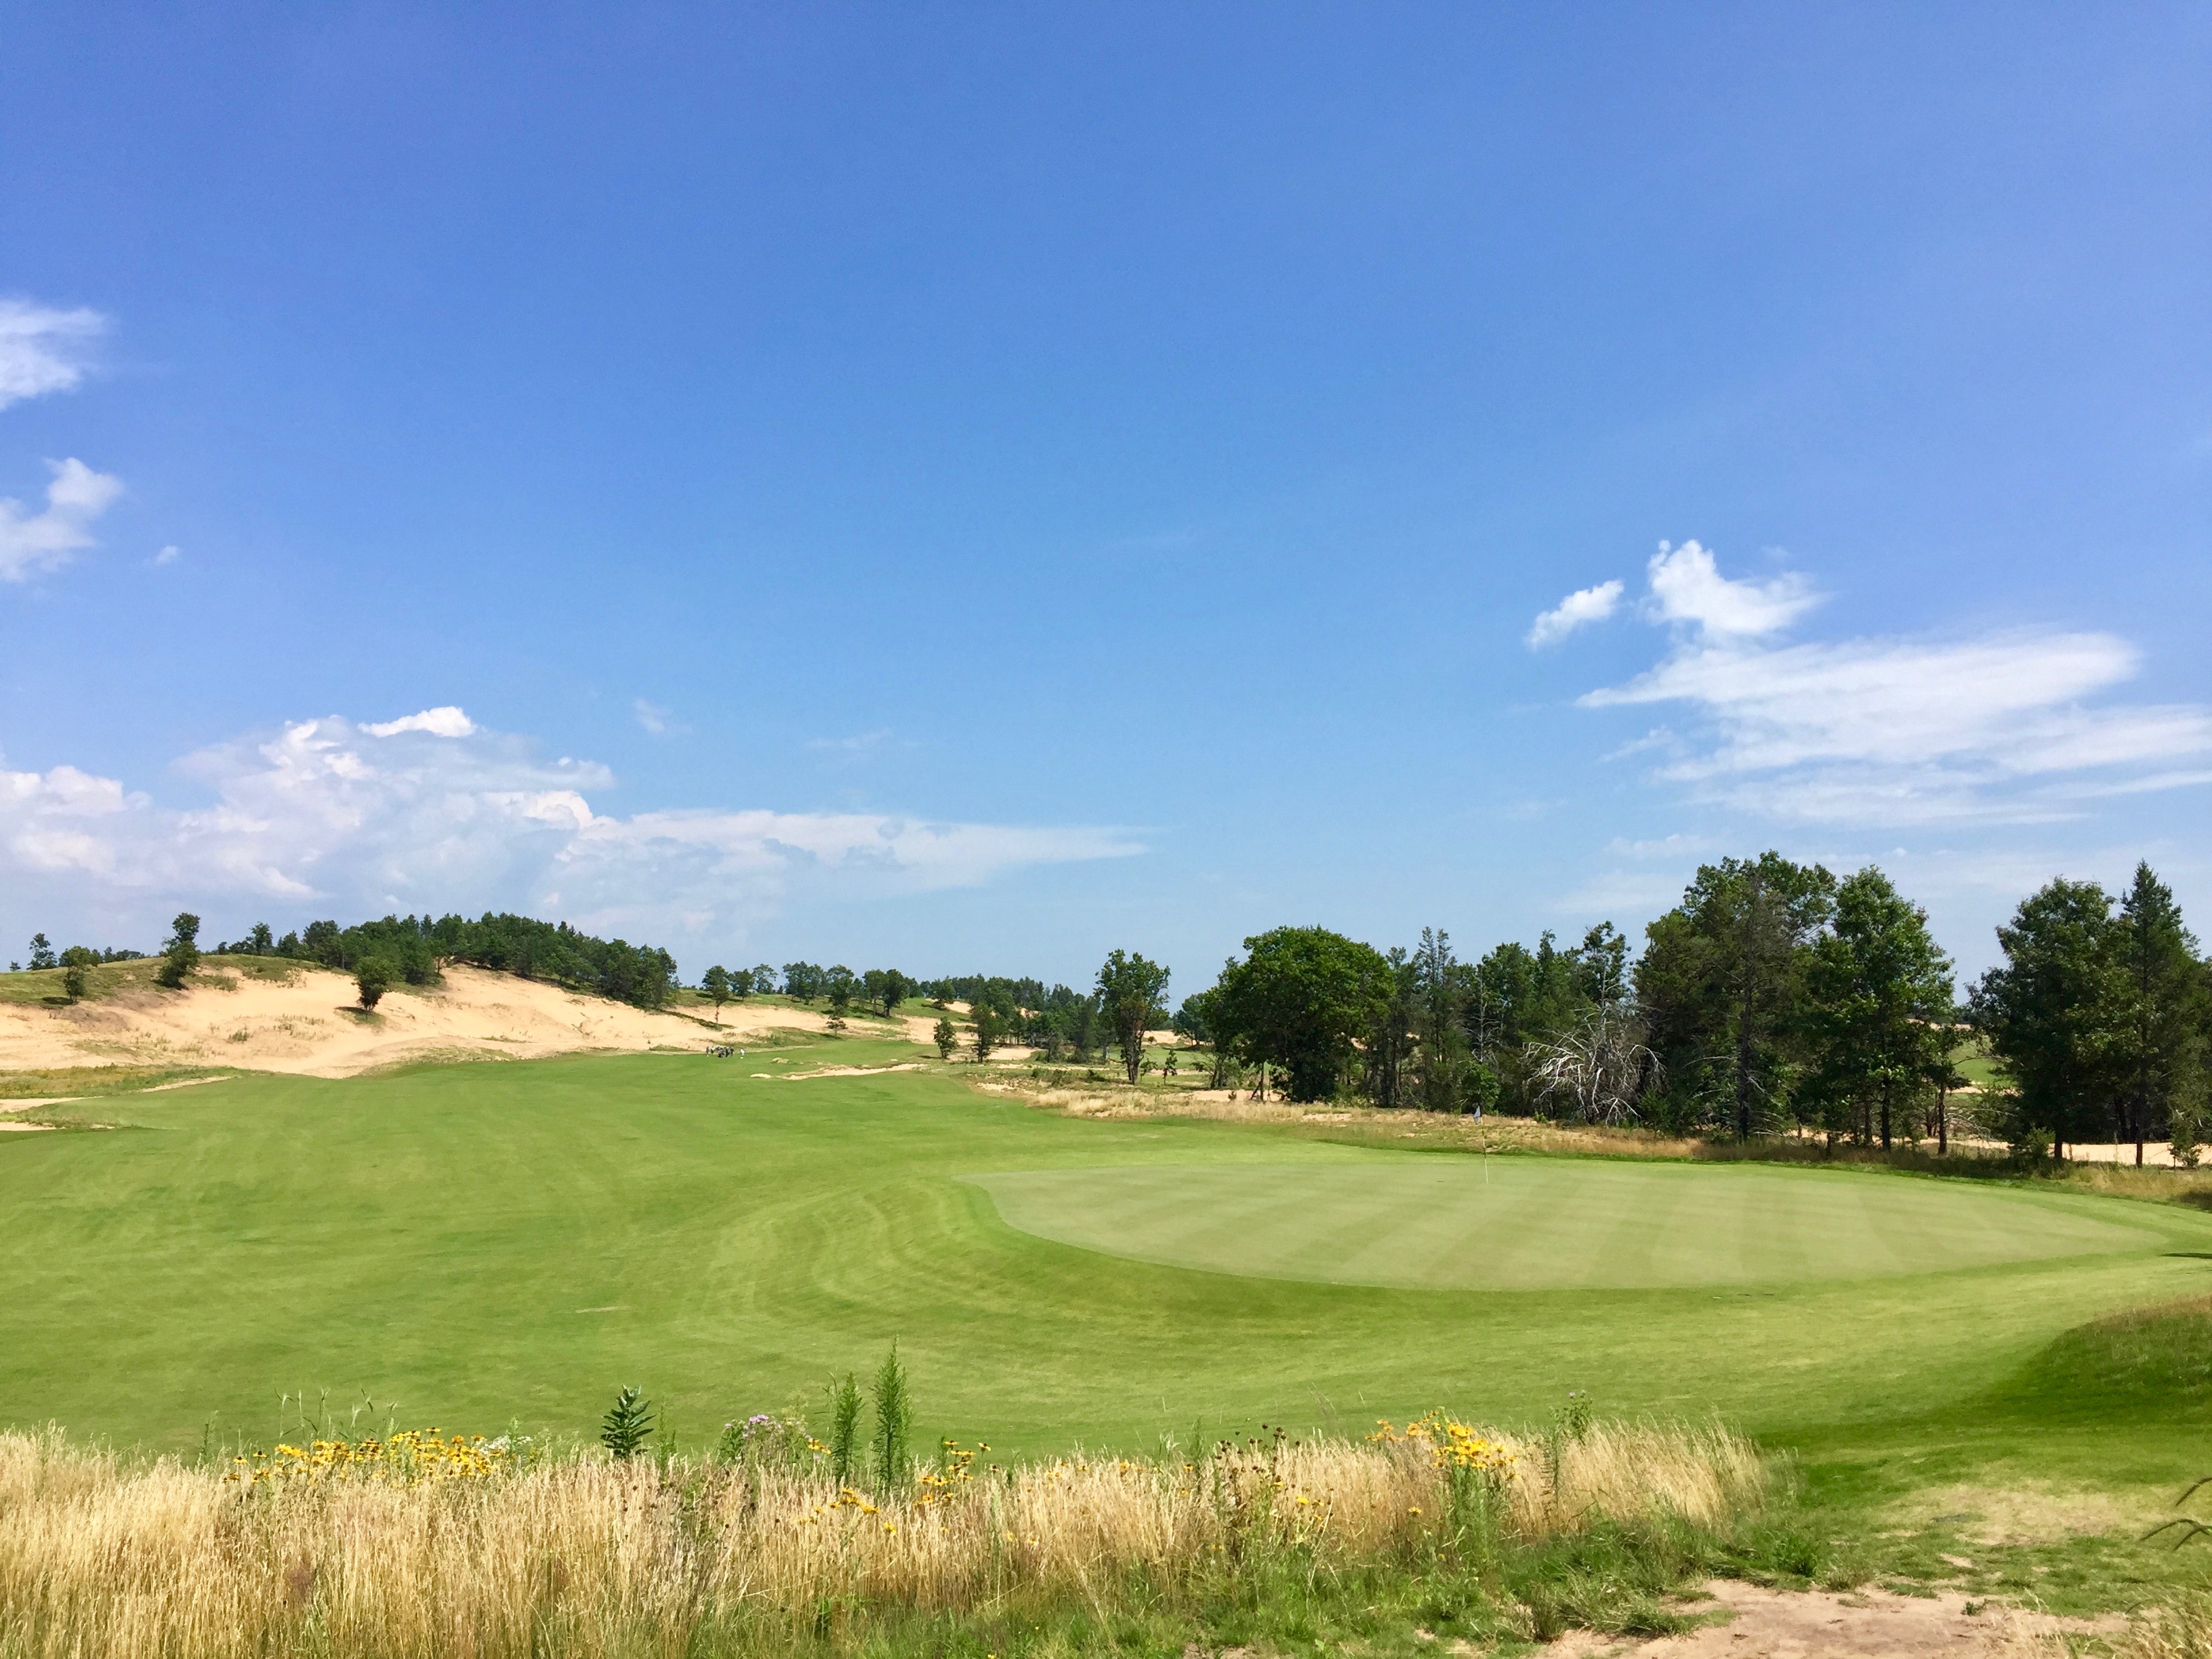 Sand Valley is one of the newest examples of how sublime golf can be on a naturally sandy site.